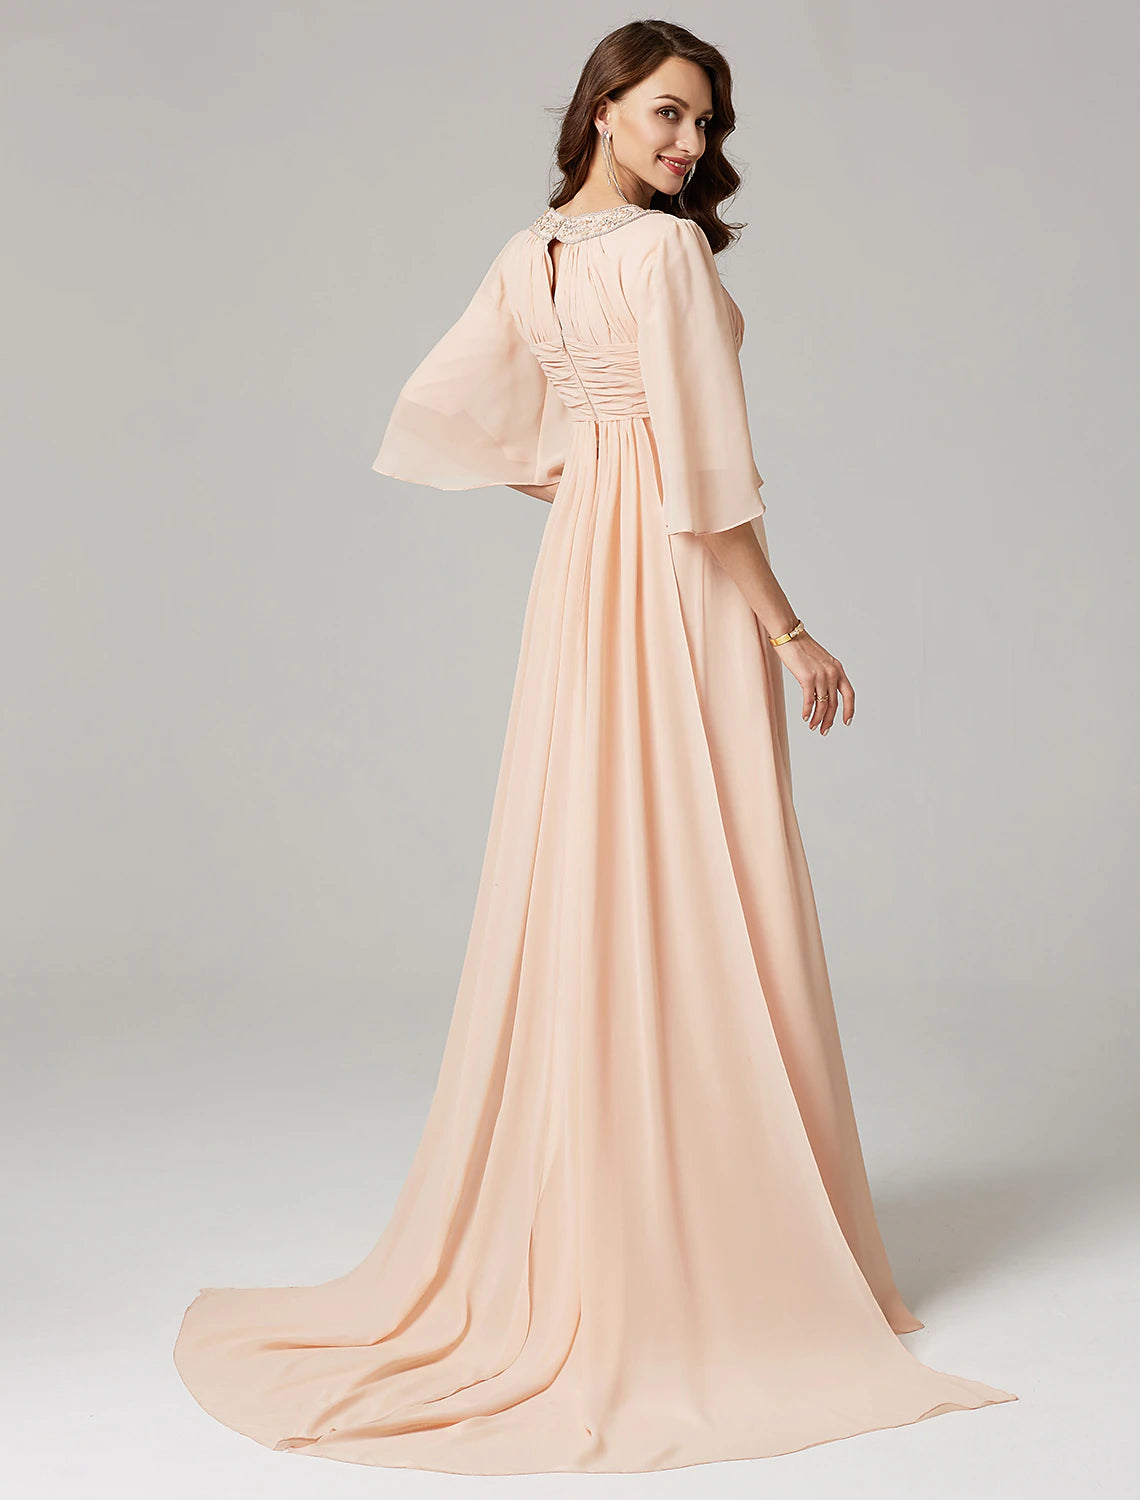 A-Line Special Occasion Dresses Elegant Dress Wedding Guest Sweep / Brush Train Half Sleeve Jewel Neck Chiffon with Beading Draping